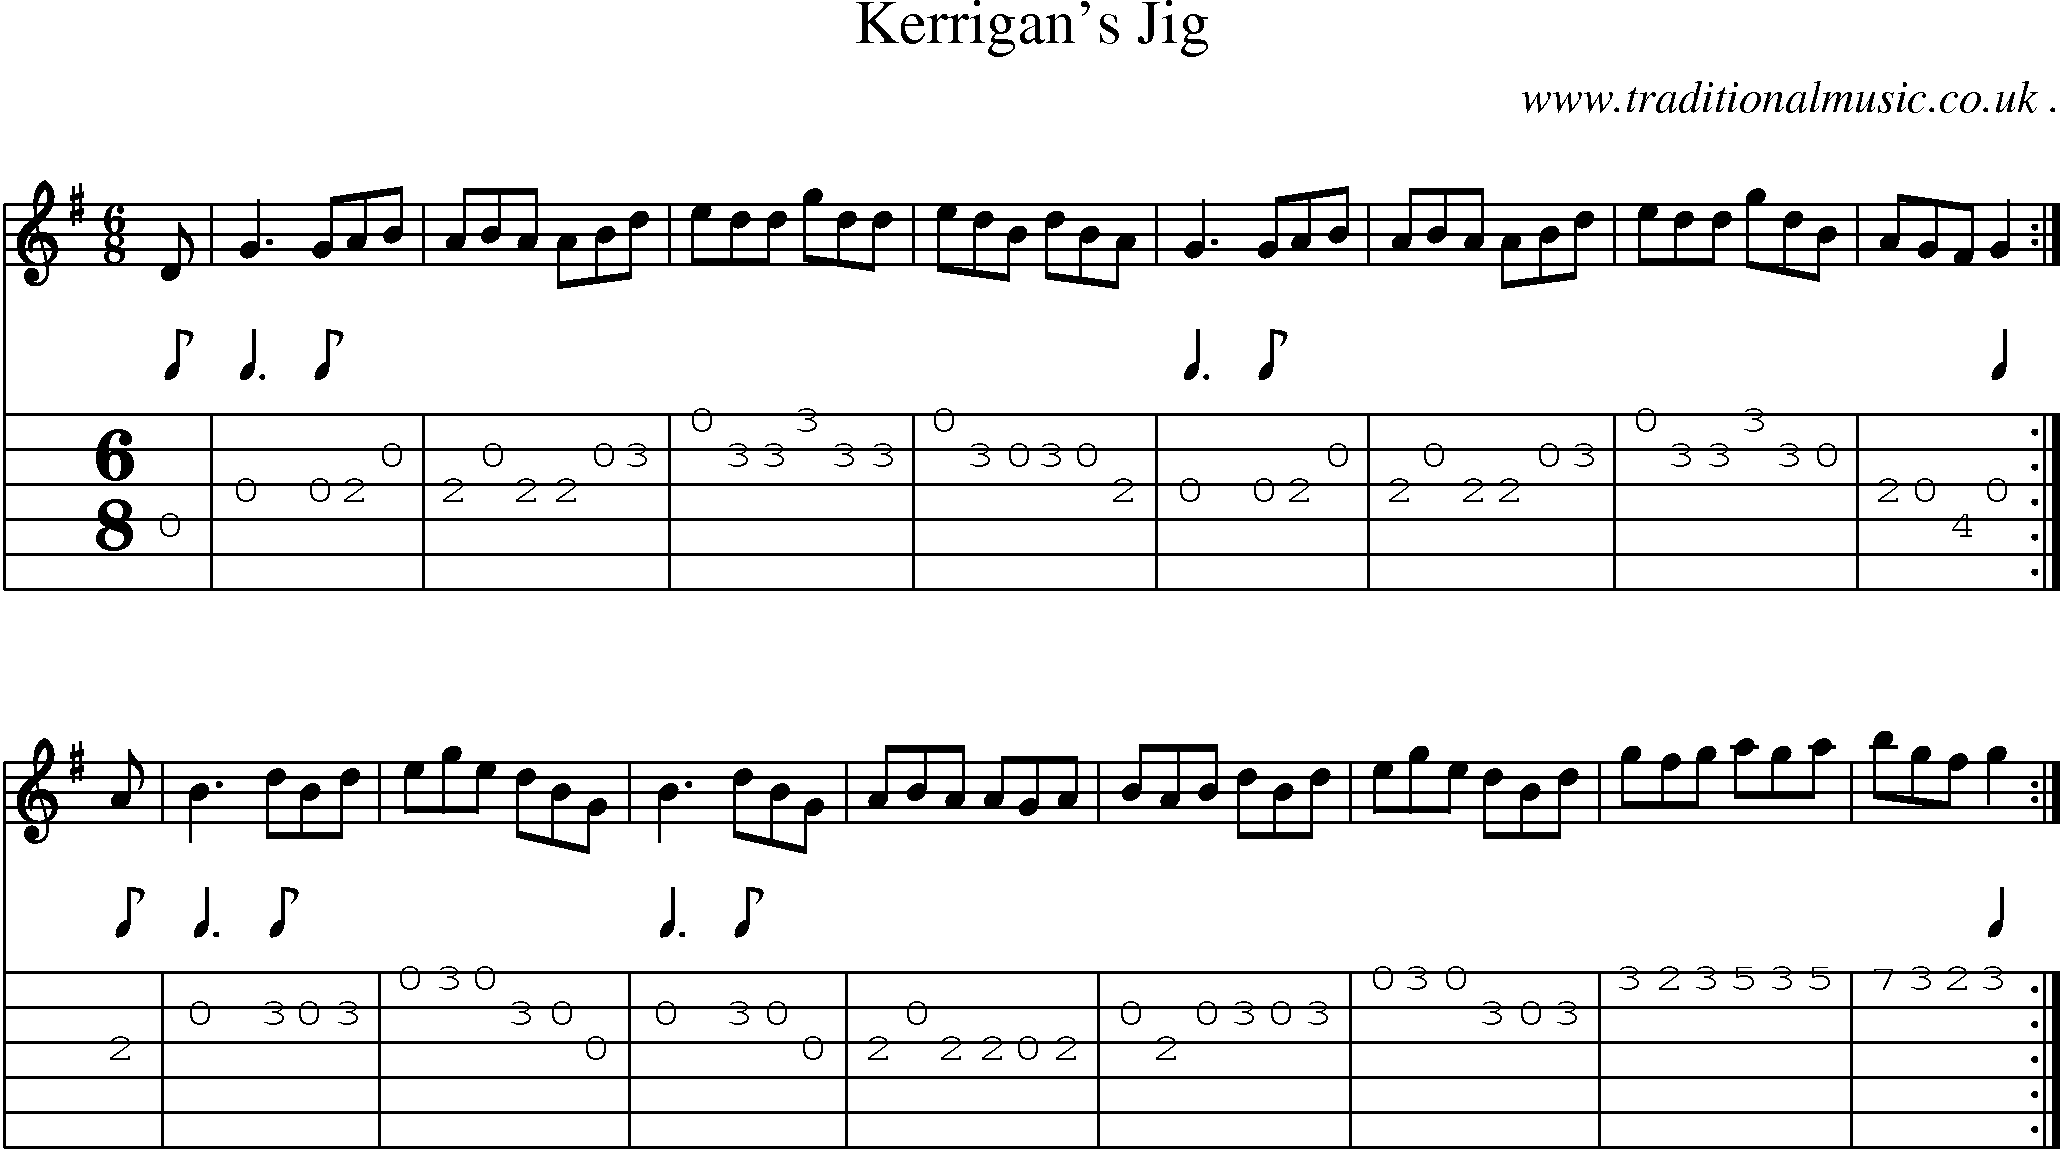 Sheet-Music and Guitar Tabs for Kerrigans Jig